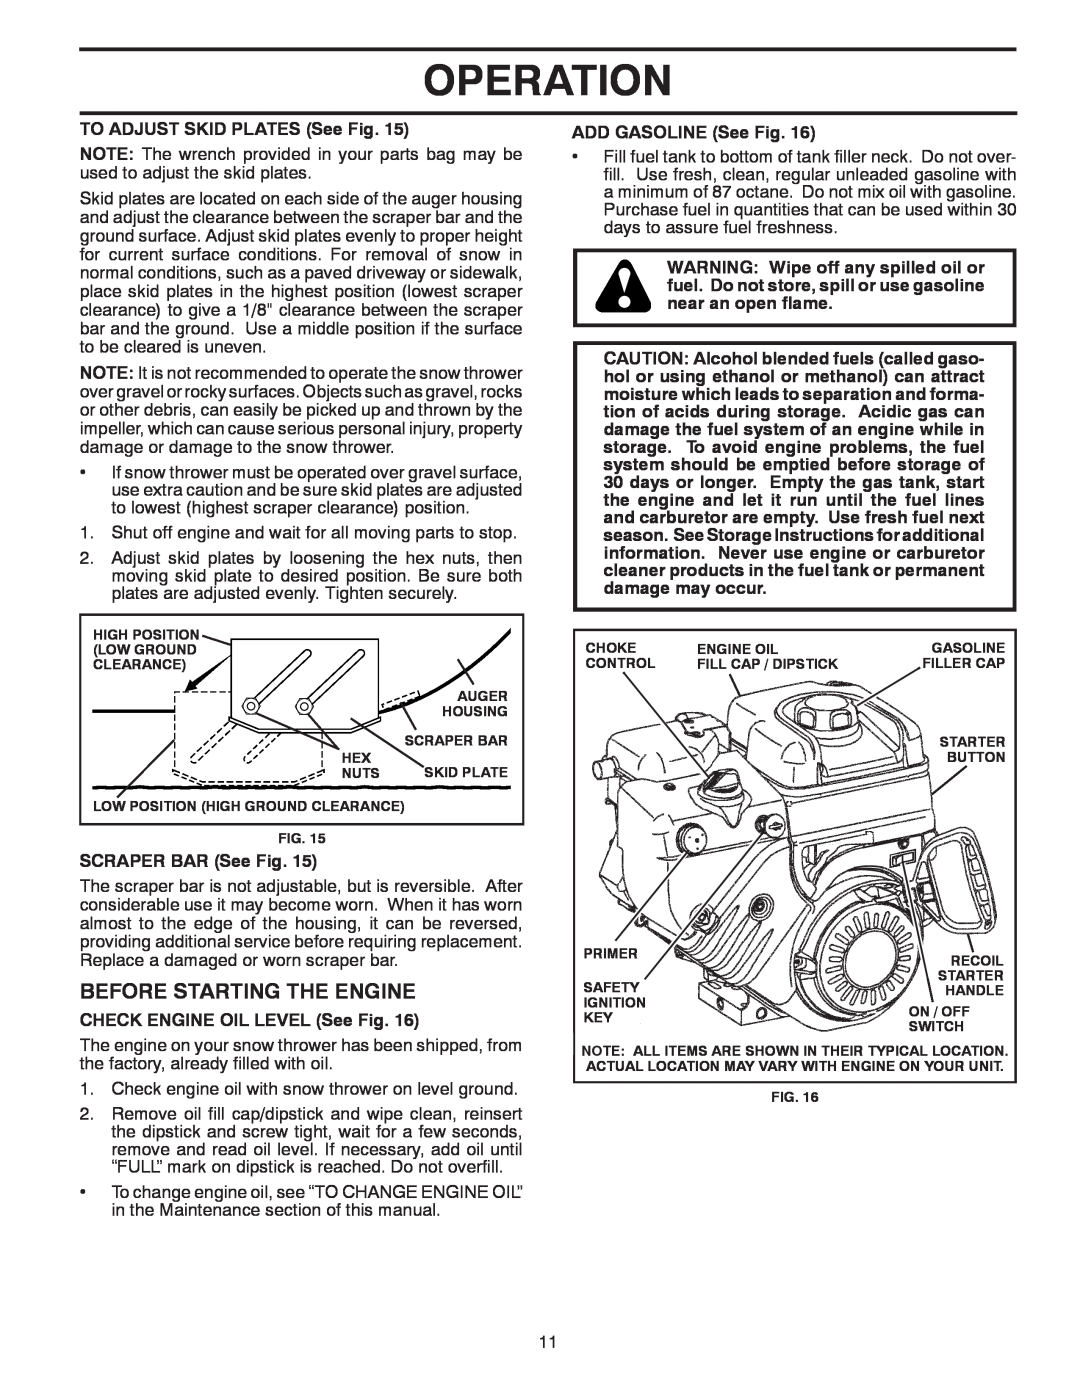 Poulan 96192003302, 430355 Before Starting The Engine, Operation, TO ADJUST SKID PLATES See Fig, SCRAPER BAR See Fig 